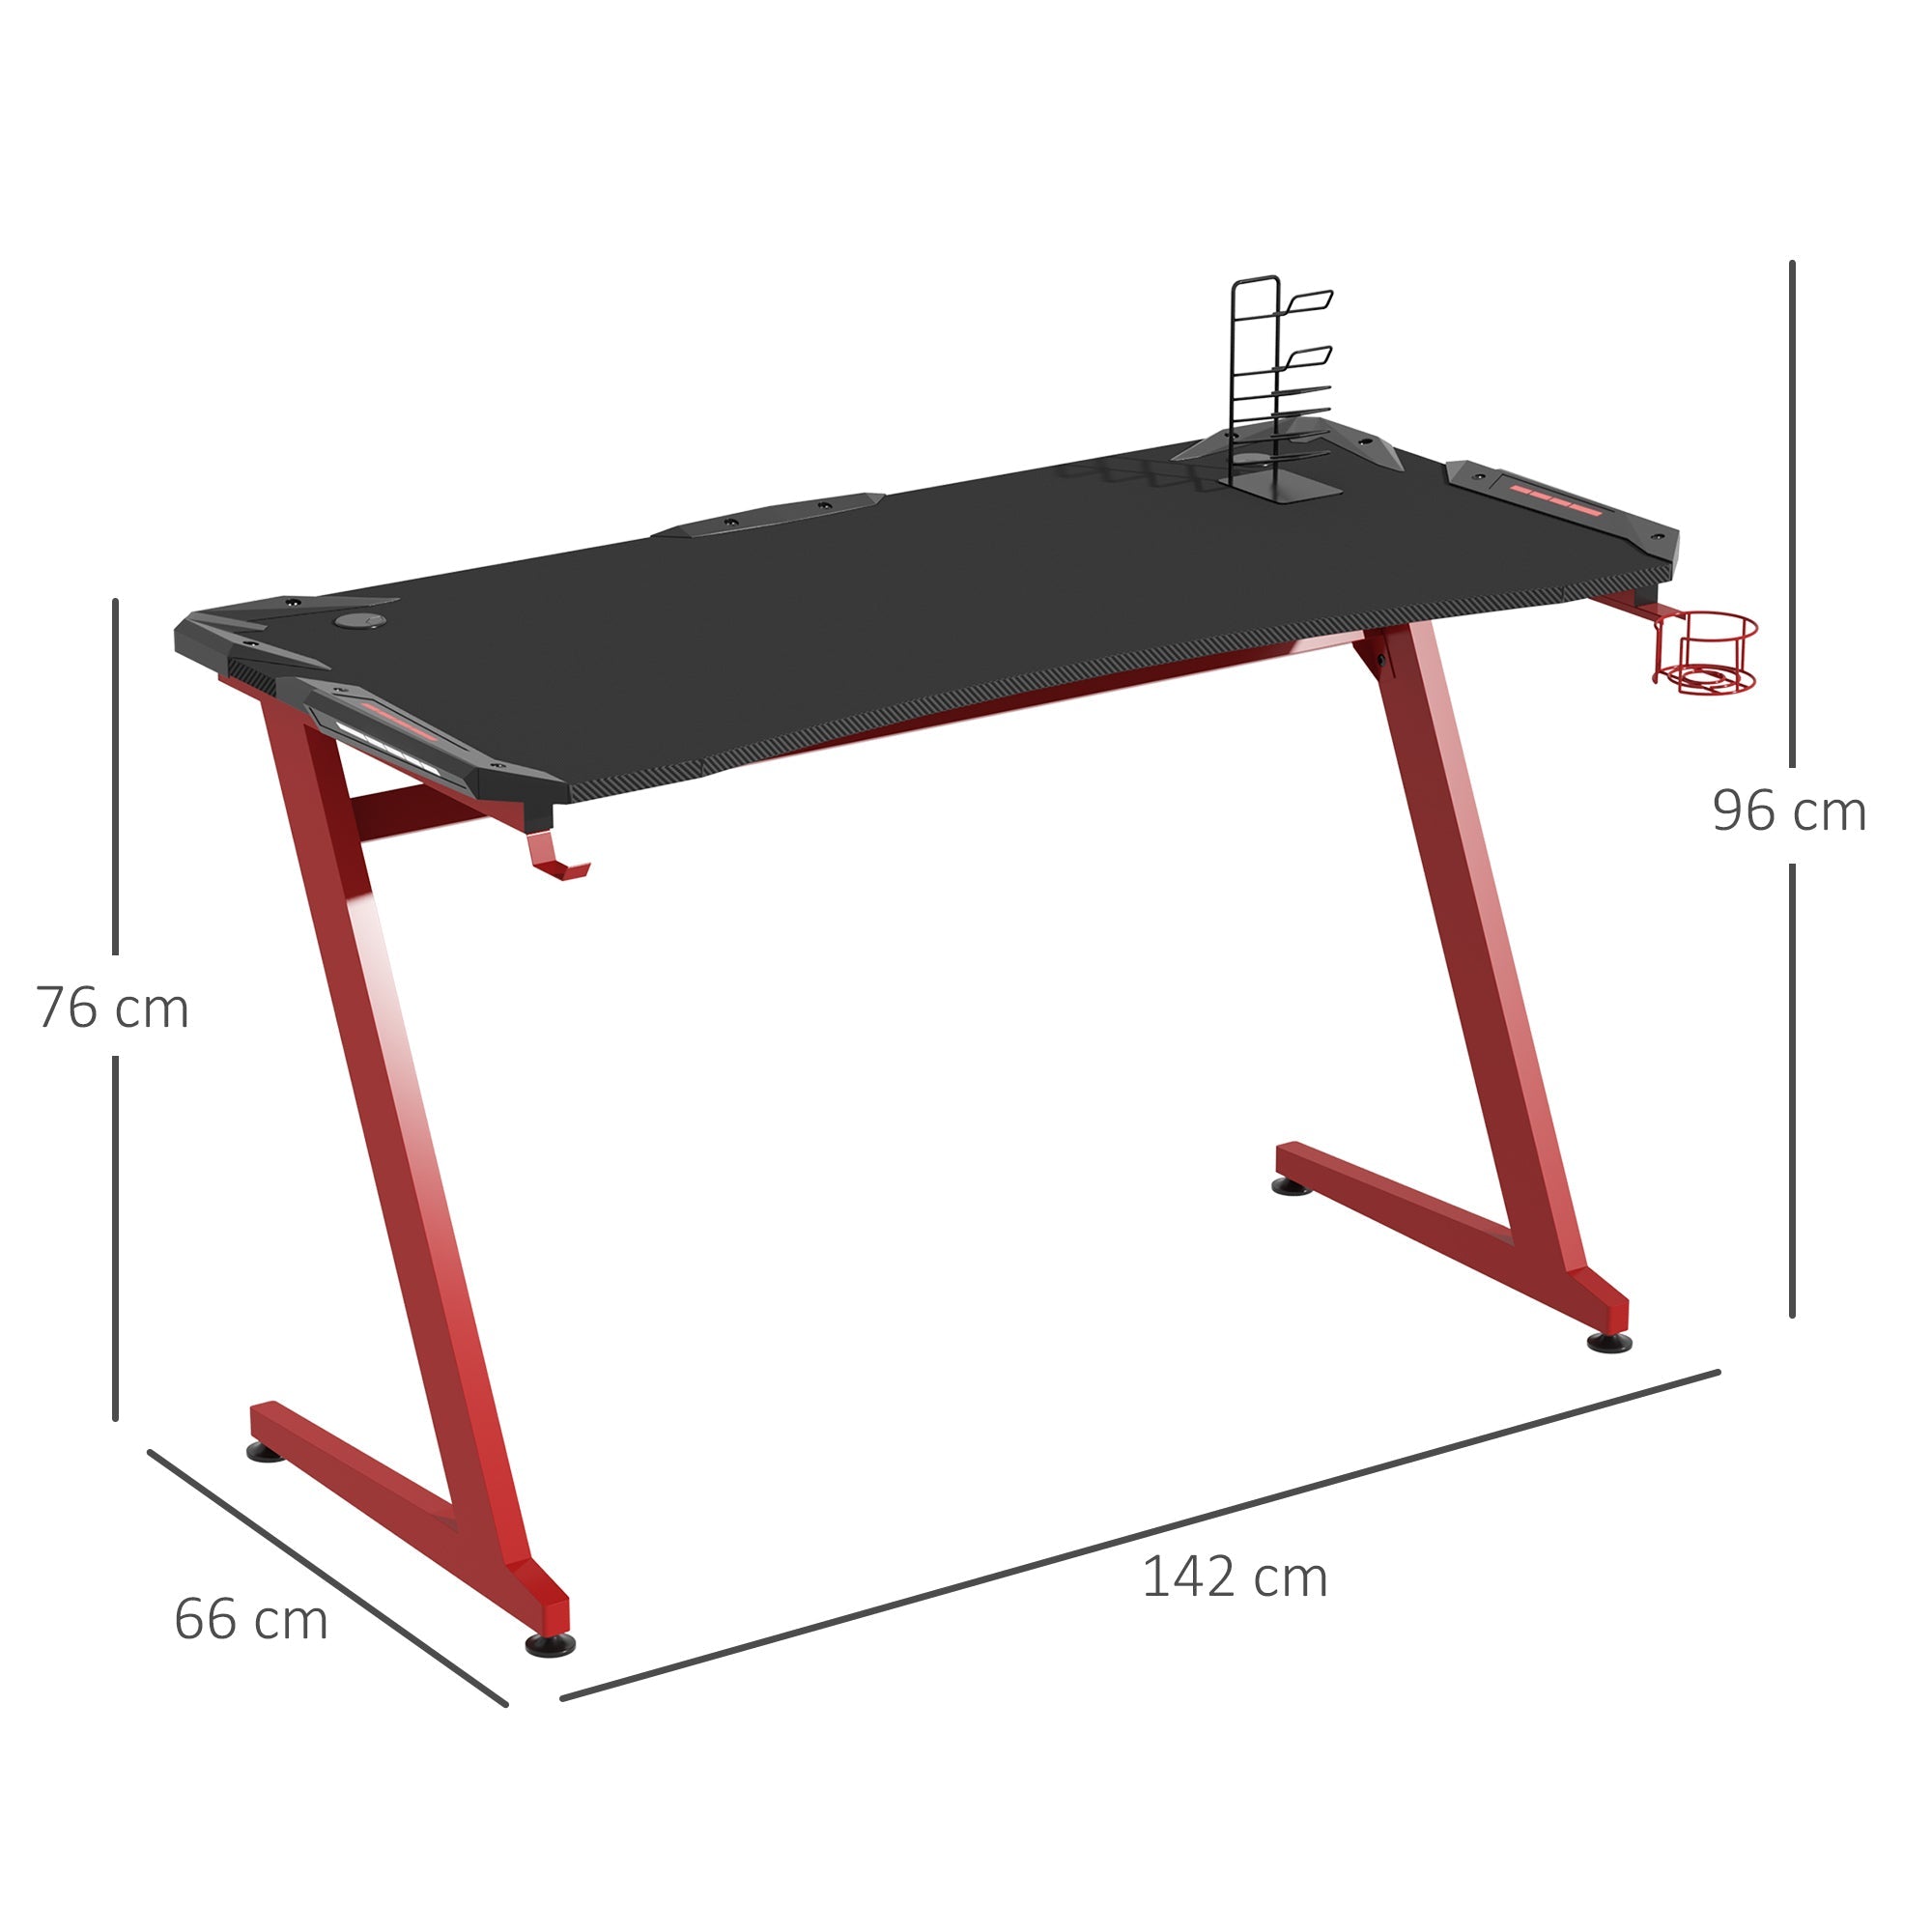 HOMCOM Gaming Desk, Ergonomic Home Office Desk, Gamer Workstation Racing Table, with Headphone Hook and Cup Holder, 142 x 66 x 96cm, Black and Red - TovaHaus